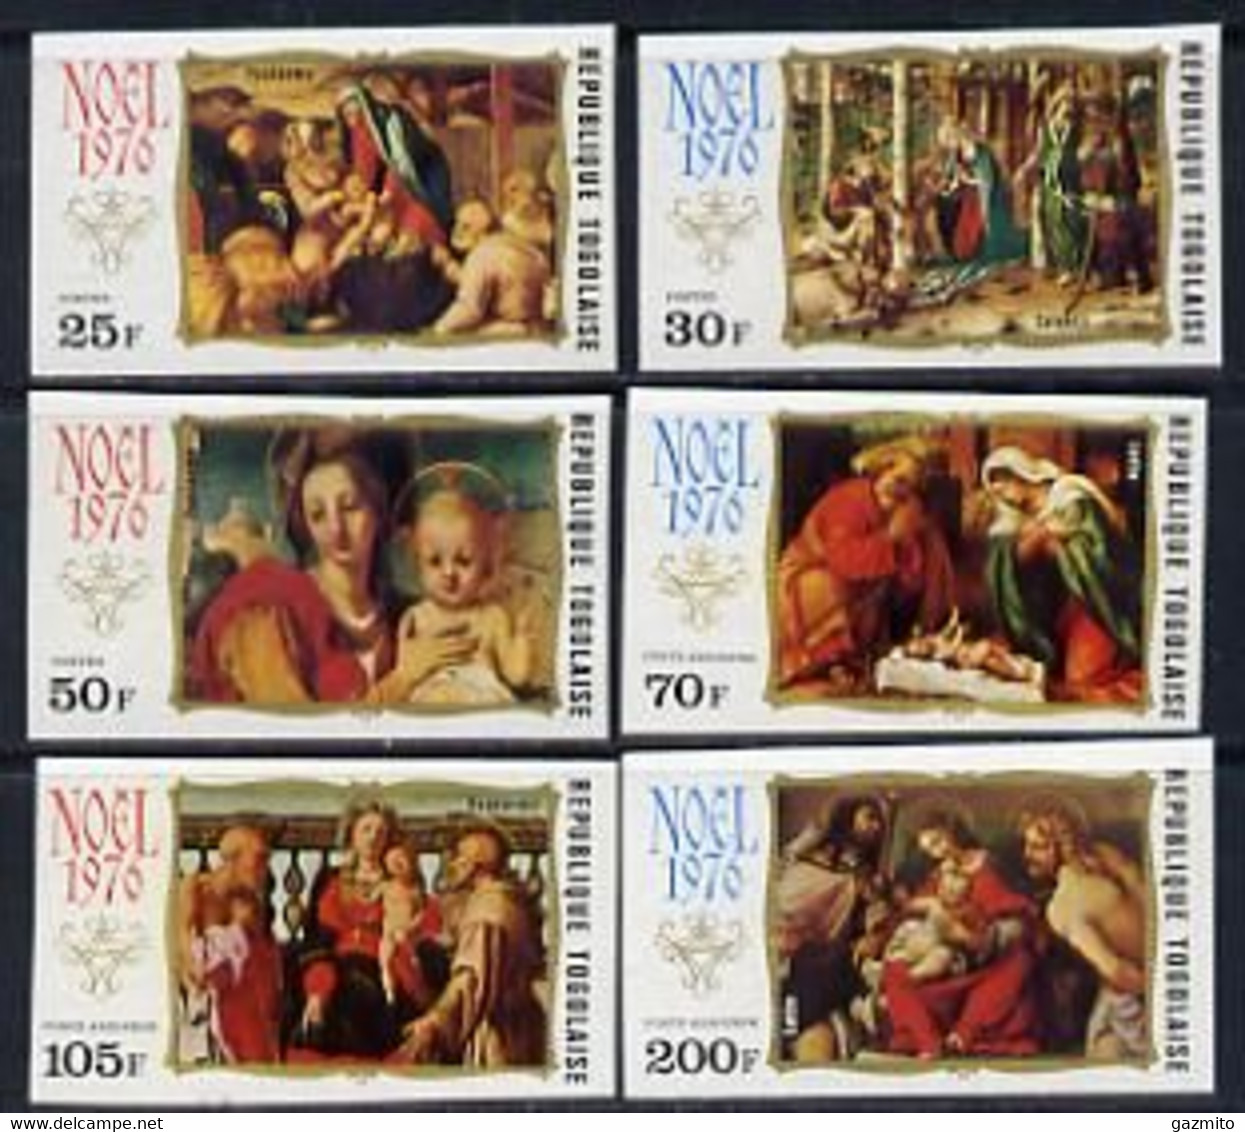 Togo 1976, Christmas, Painting By Carrucci, Crivelli, Lotto, 6val IMPERFORATED - Tableaux